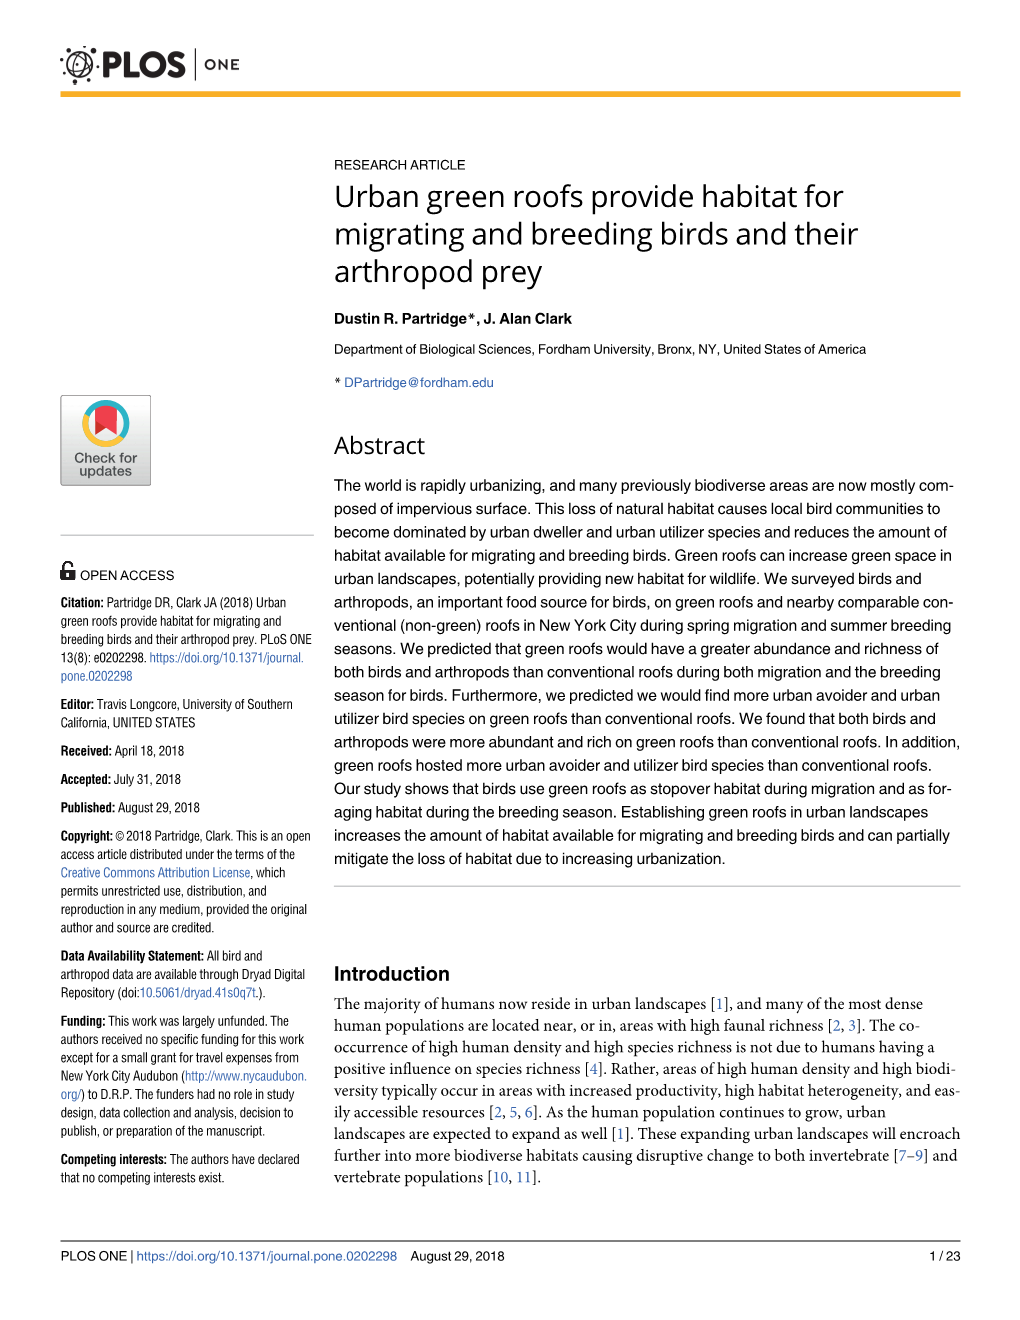 Urban Green Roofs Provide Habitat for Migrating and Breeding Birds and Their Arthropod Prey